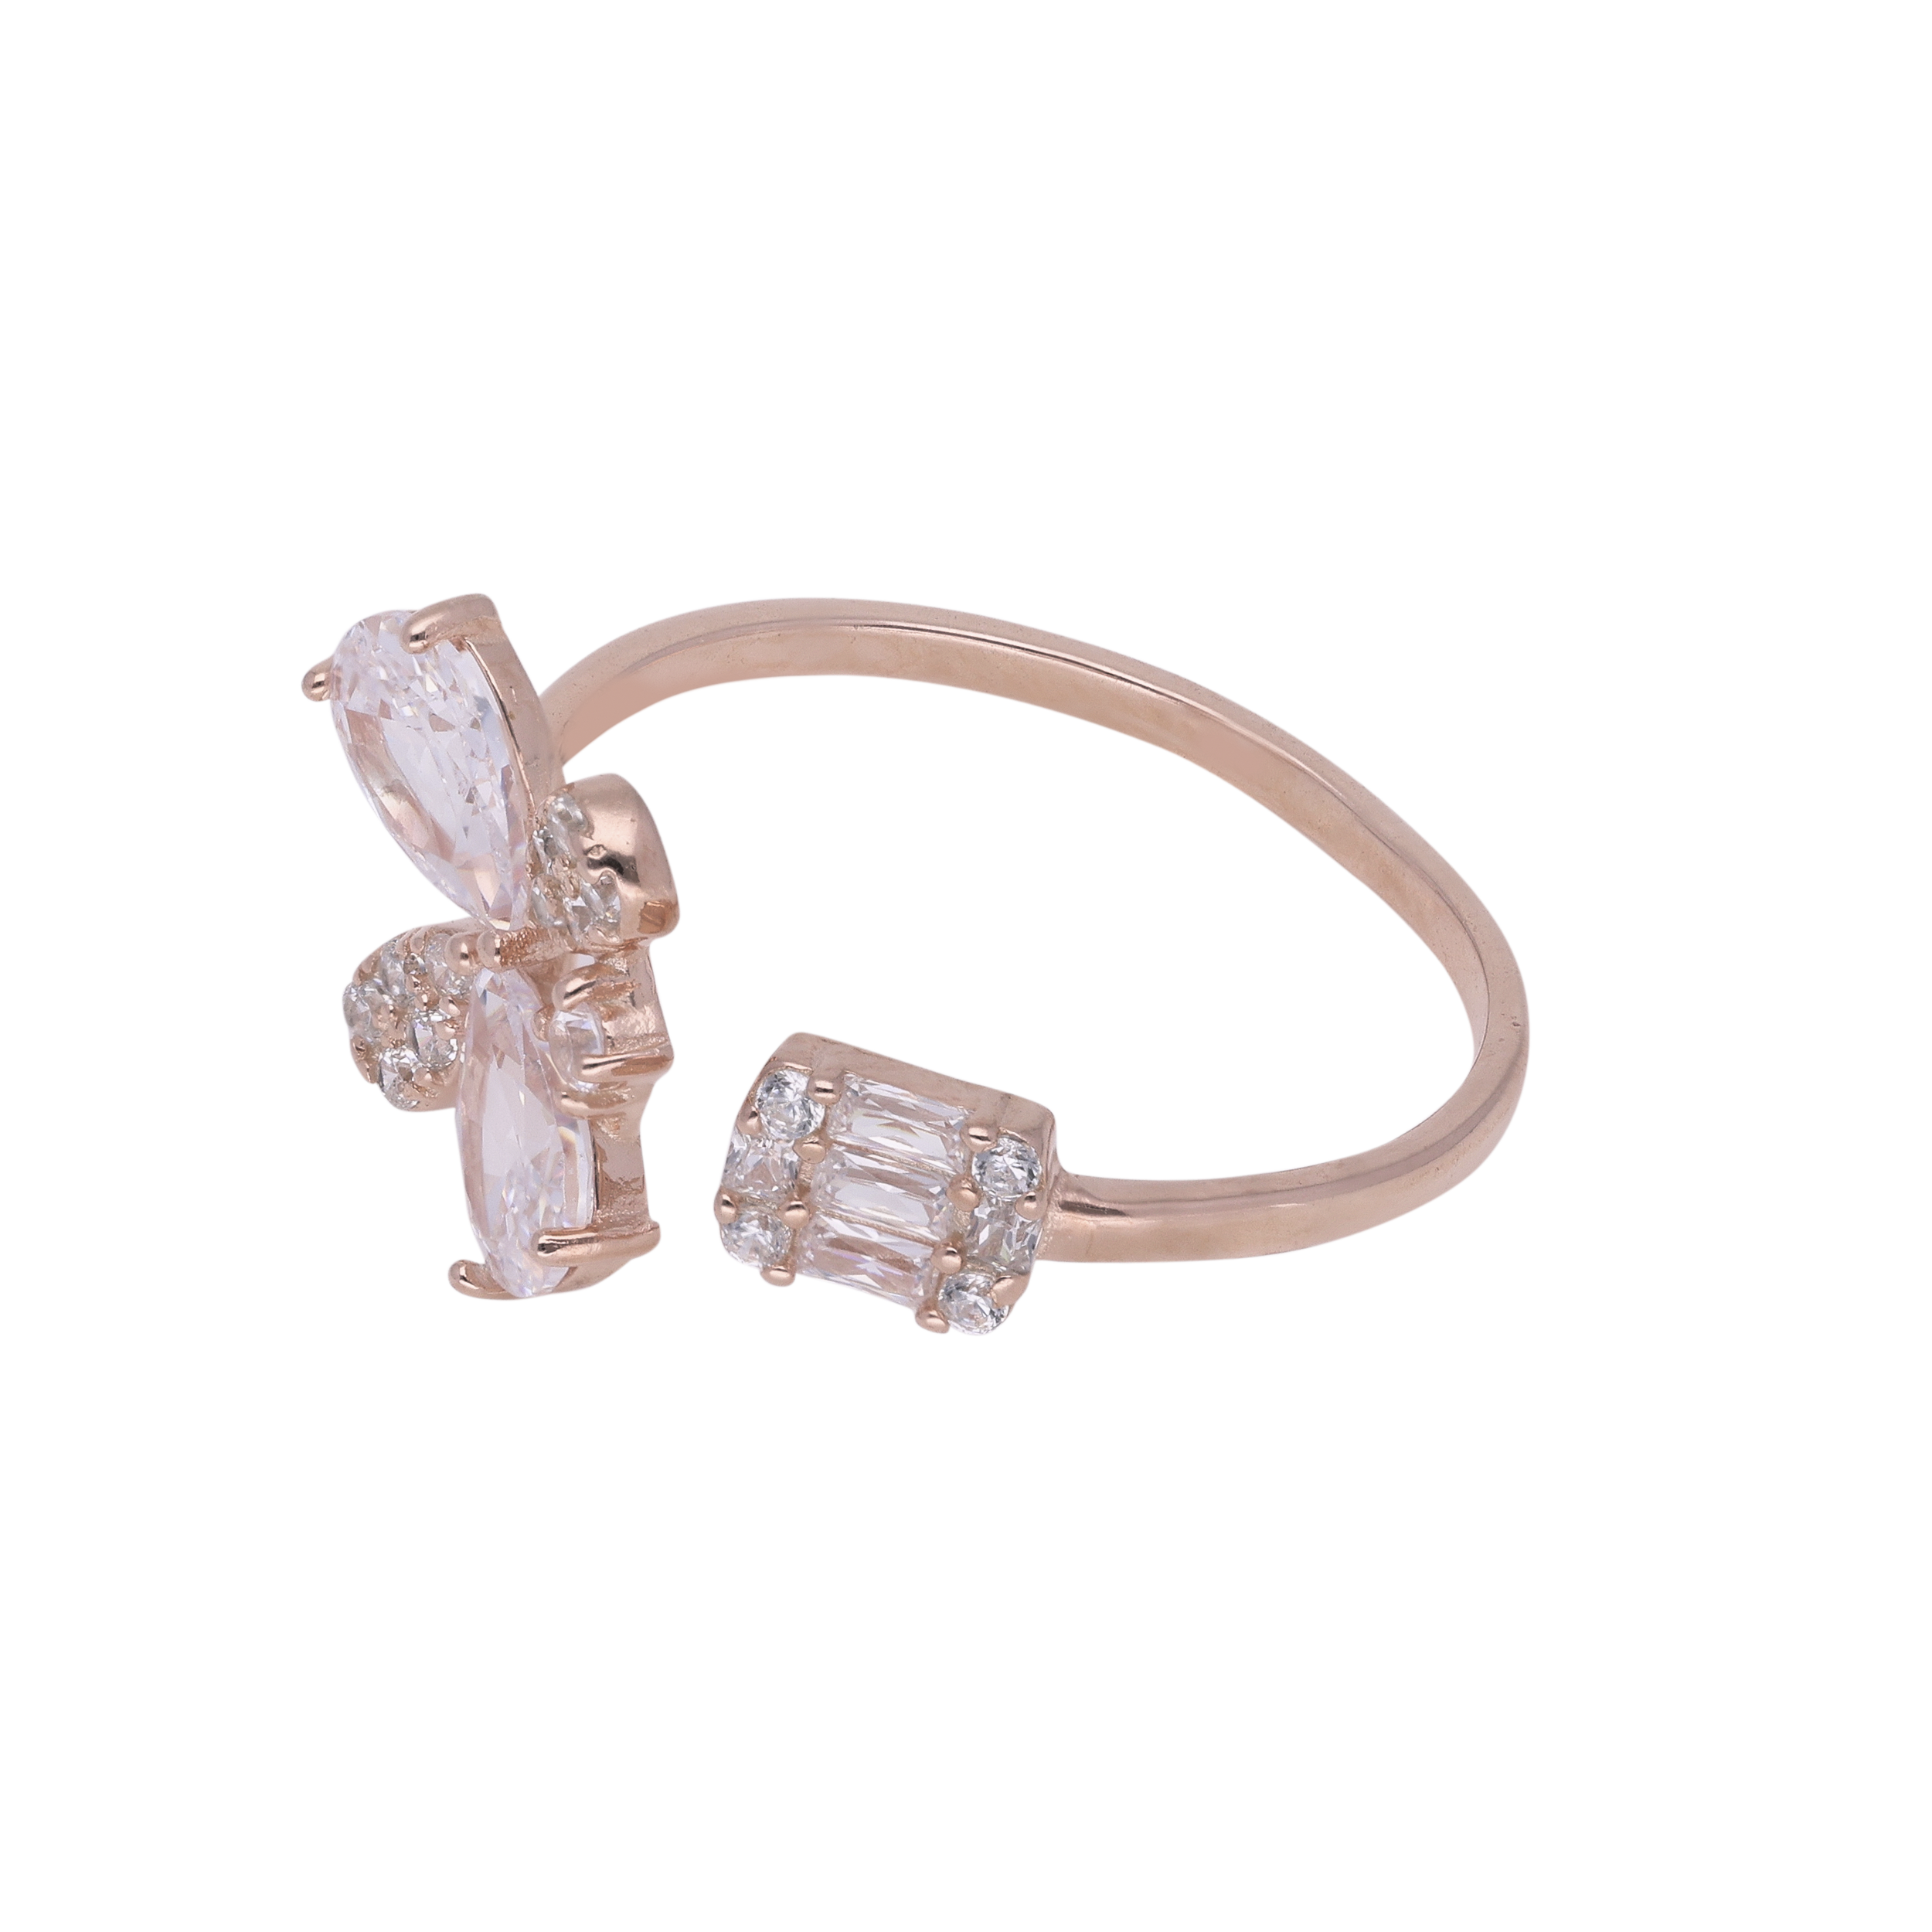 Radiant Rose: Open Ring with Cubic Zirconia in Rose Gold | SKU : 0019889146, 0019889160